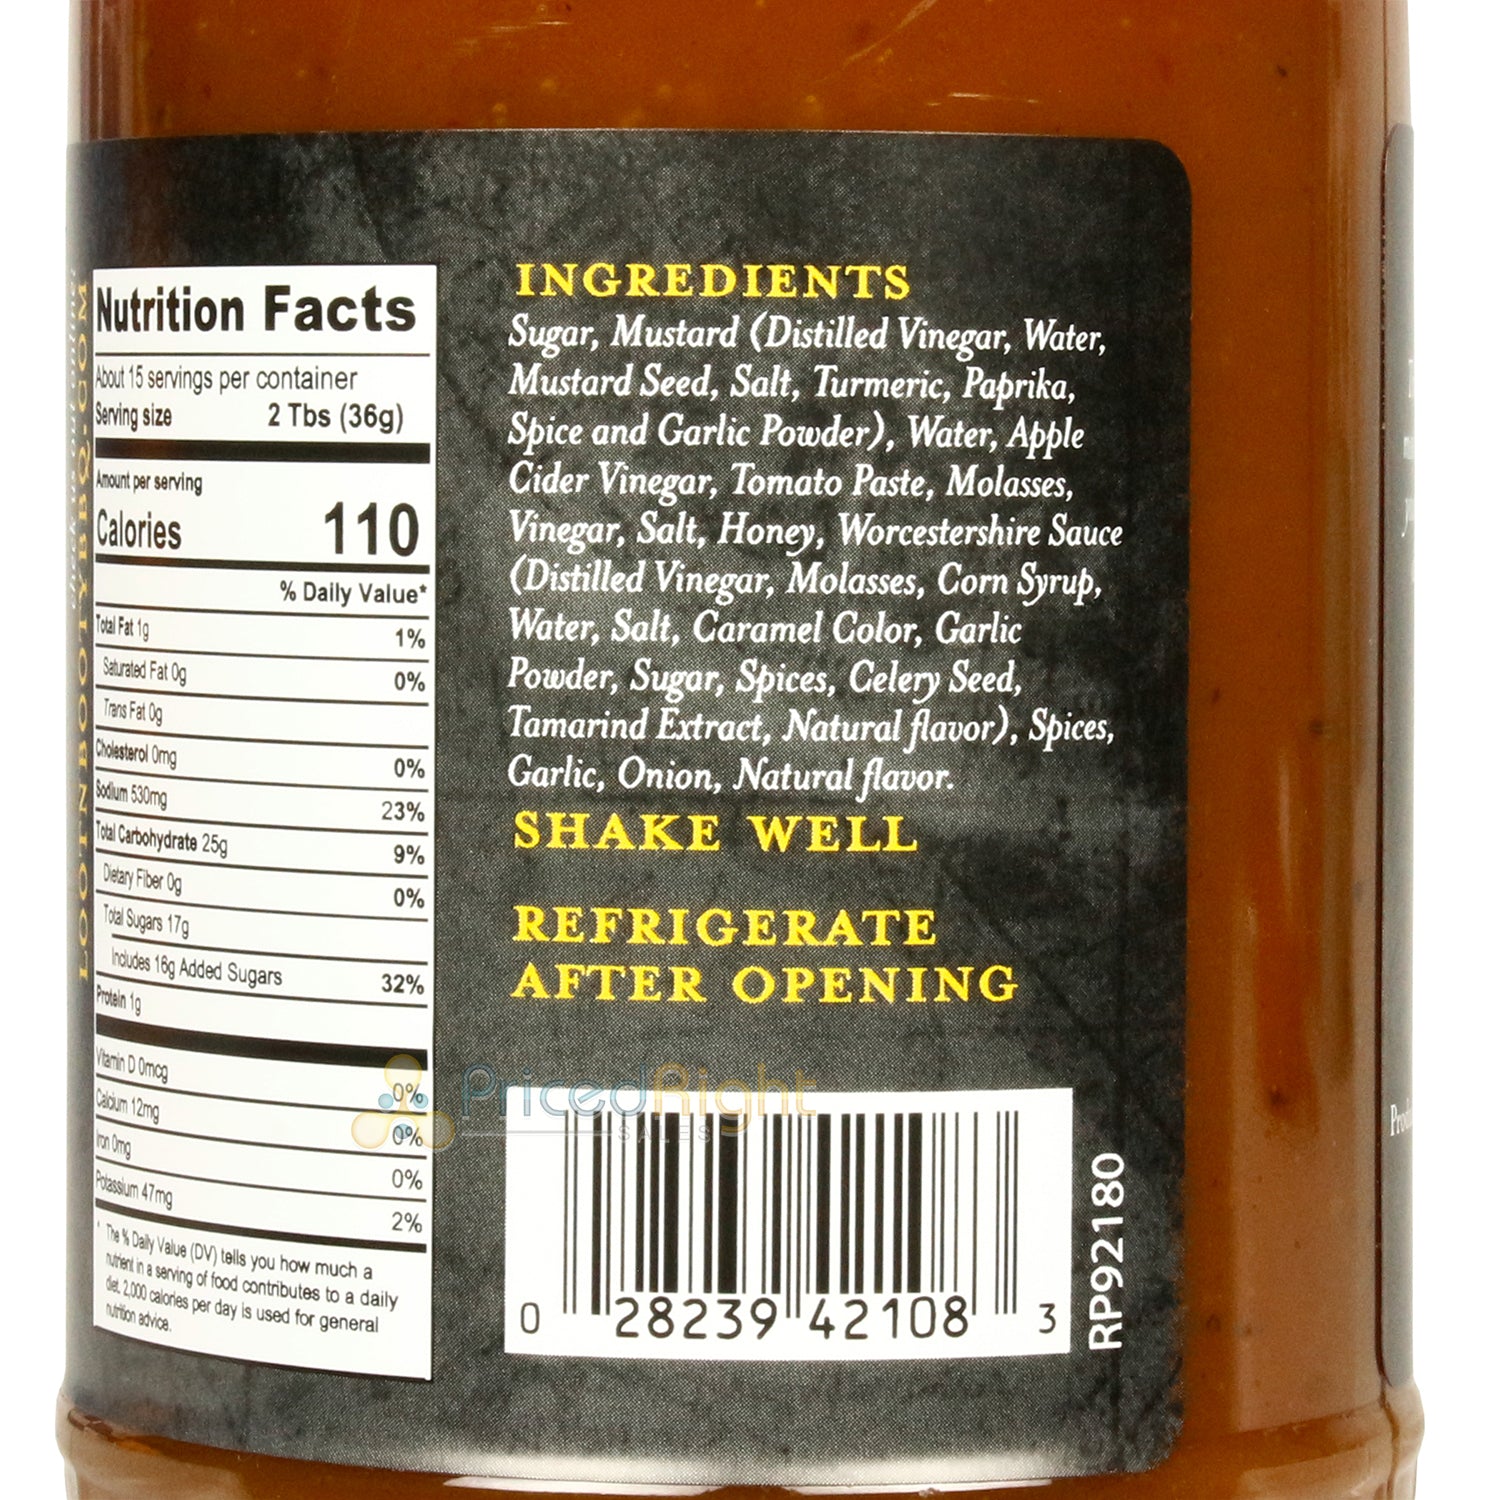 Loot N' Booty BBQ Honey Gold BBQ Sauce Sweet and Tangy Gluten Free 19.5 Ounce